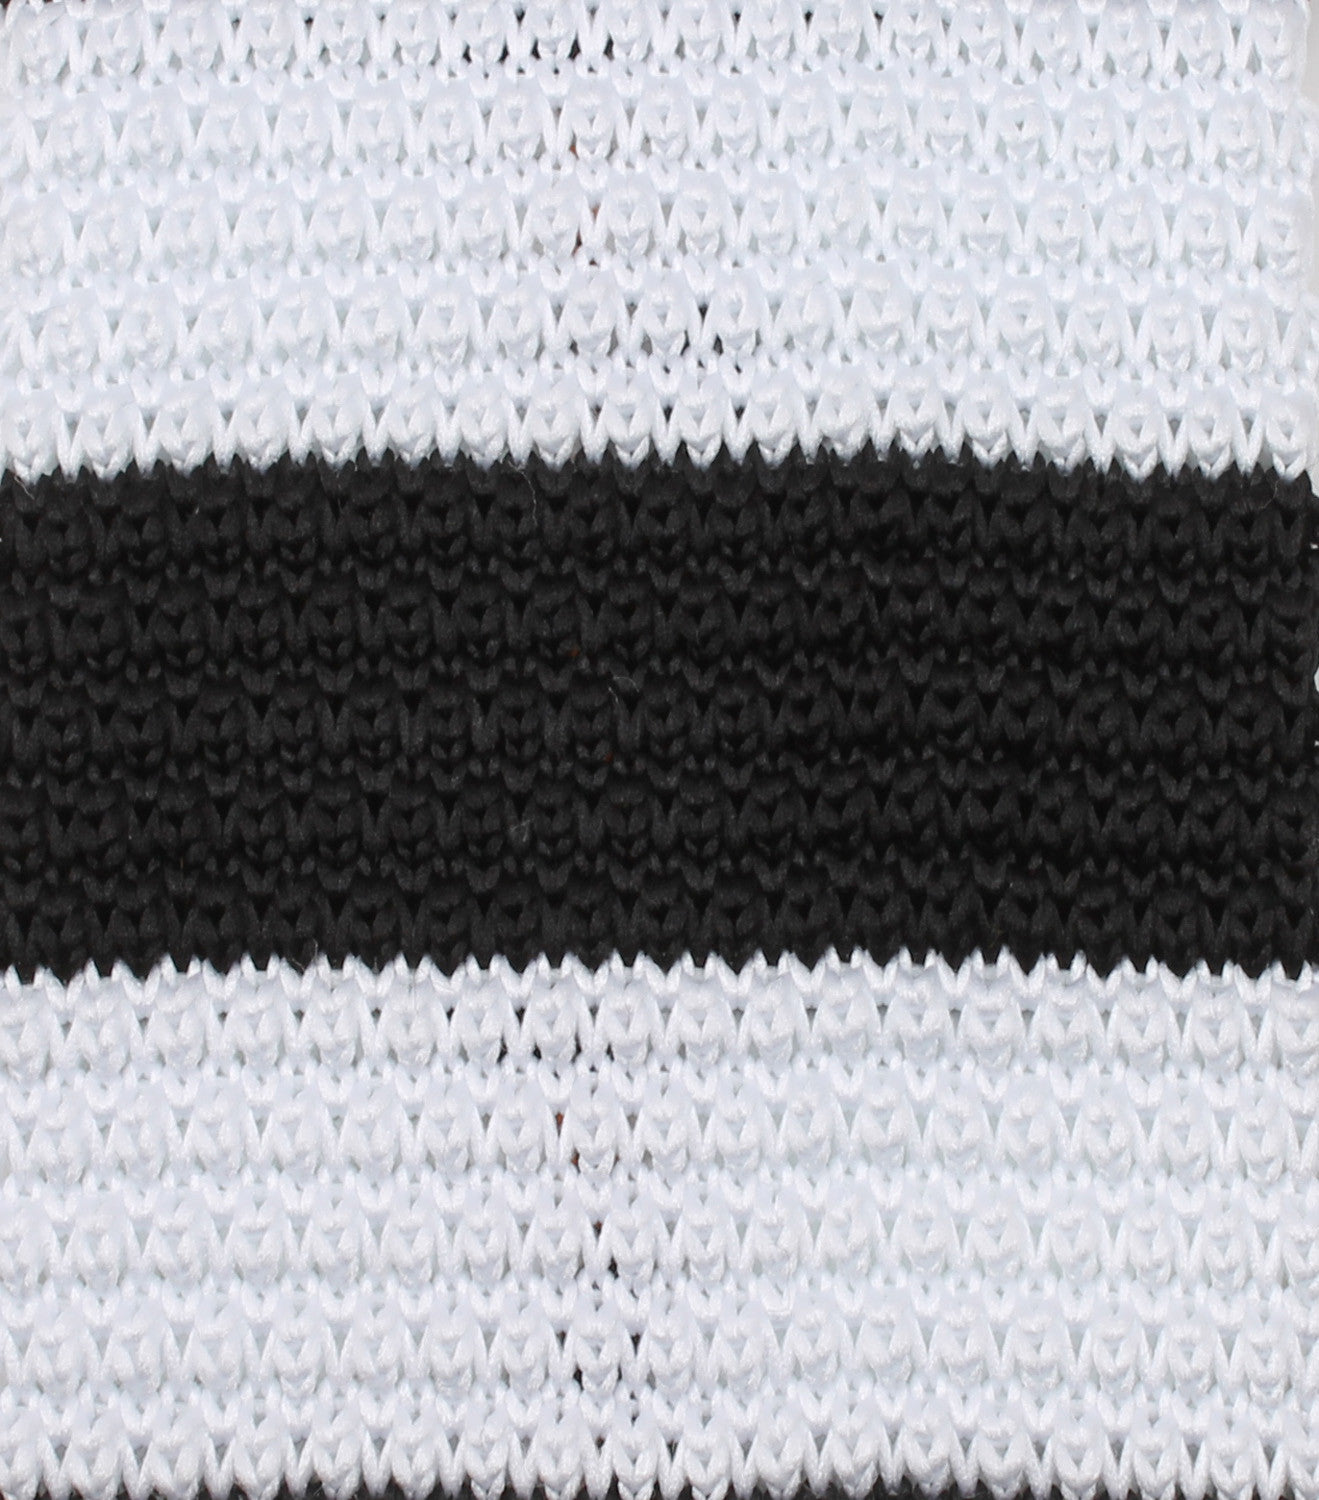 Black & White Thick Stripes Knitted Tie Detail View